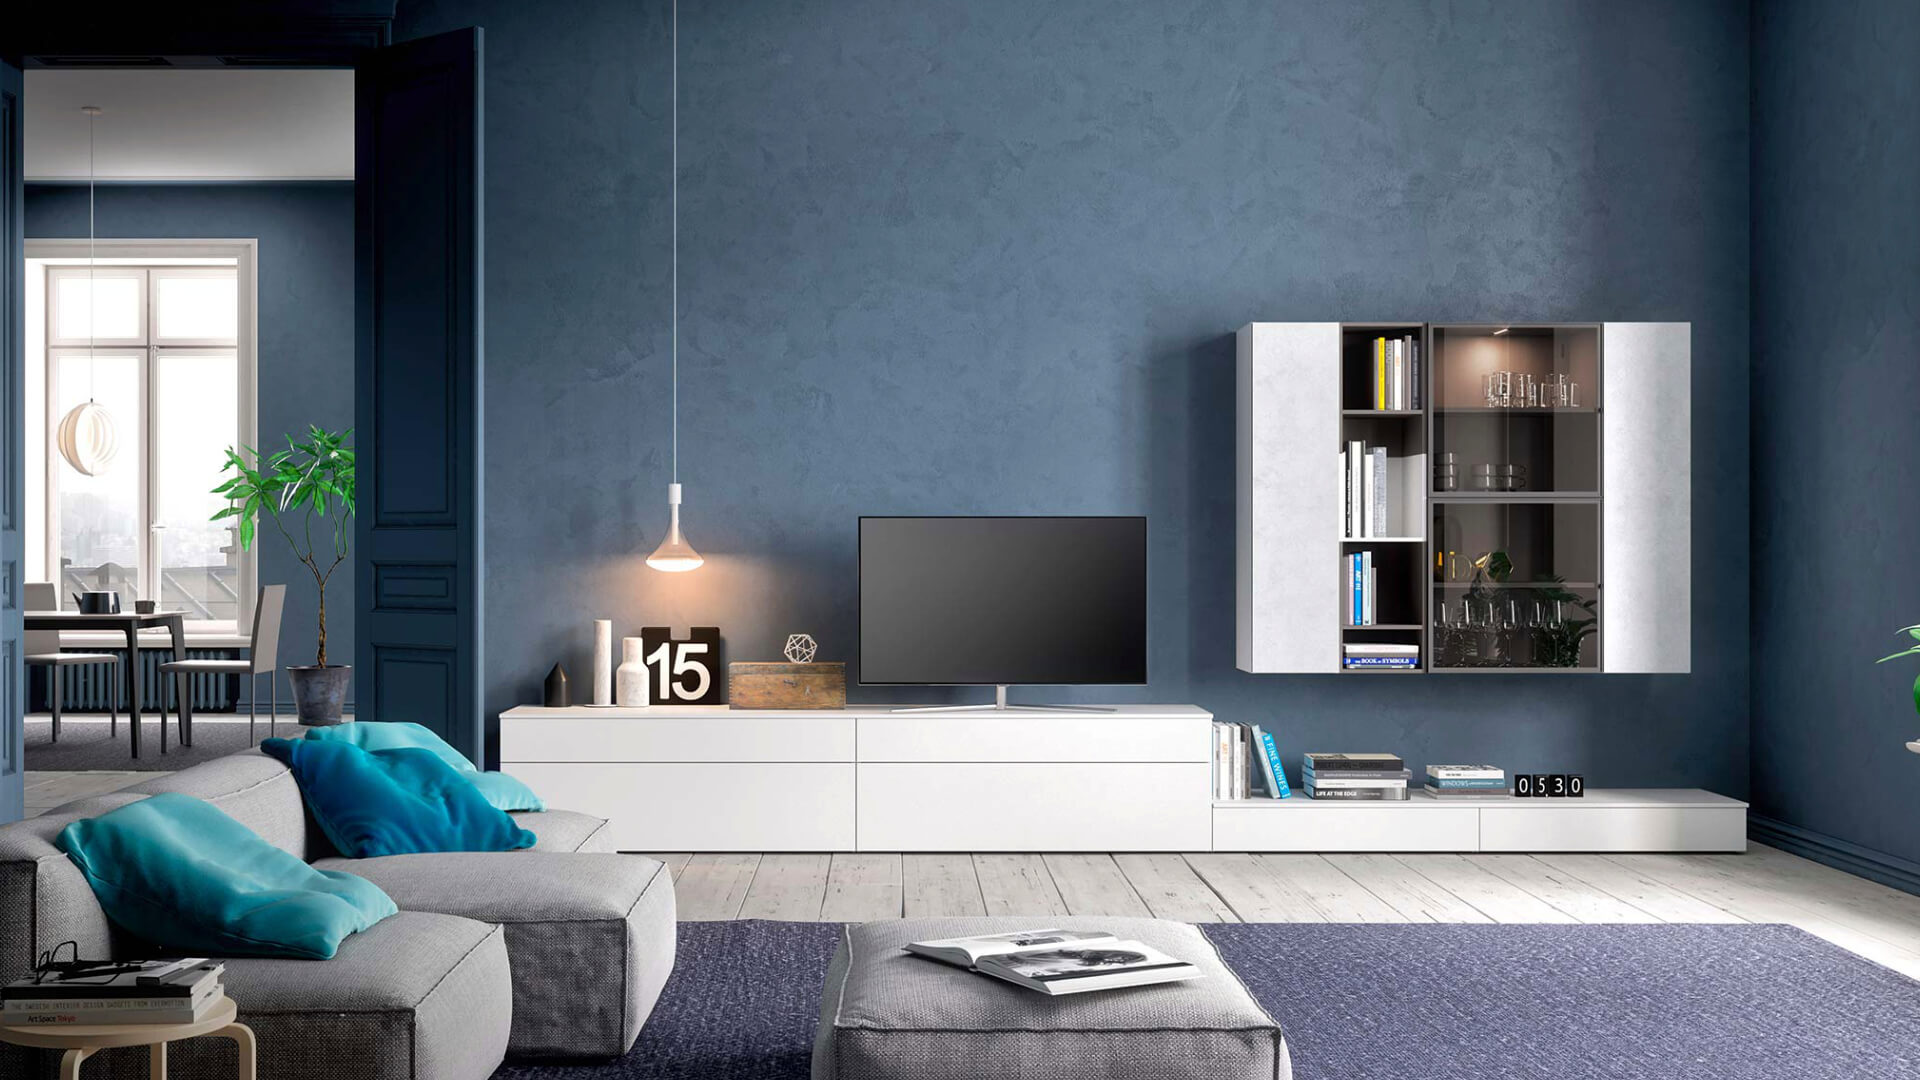 Blog IDW - Living room and lighting: the winning combination of the living area